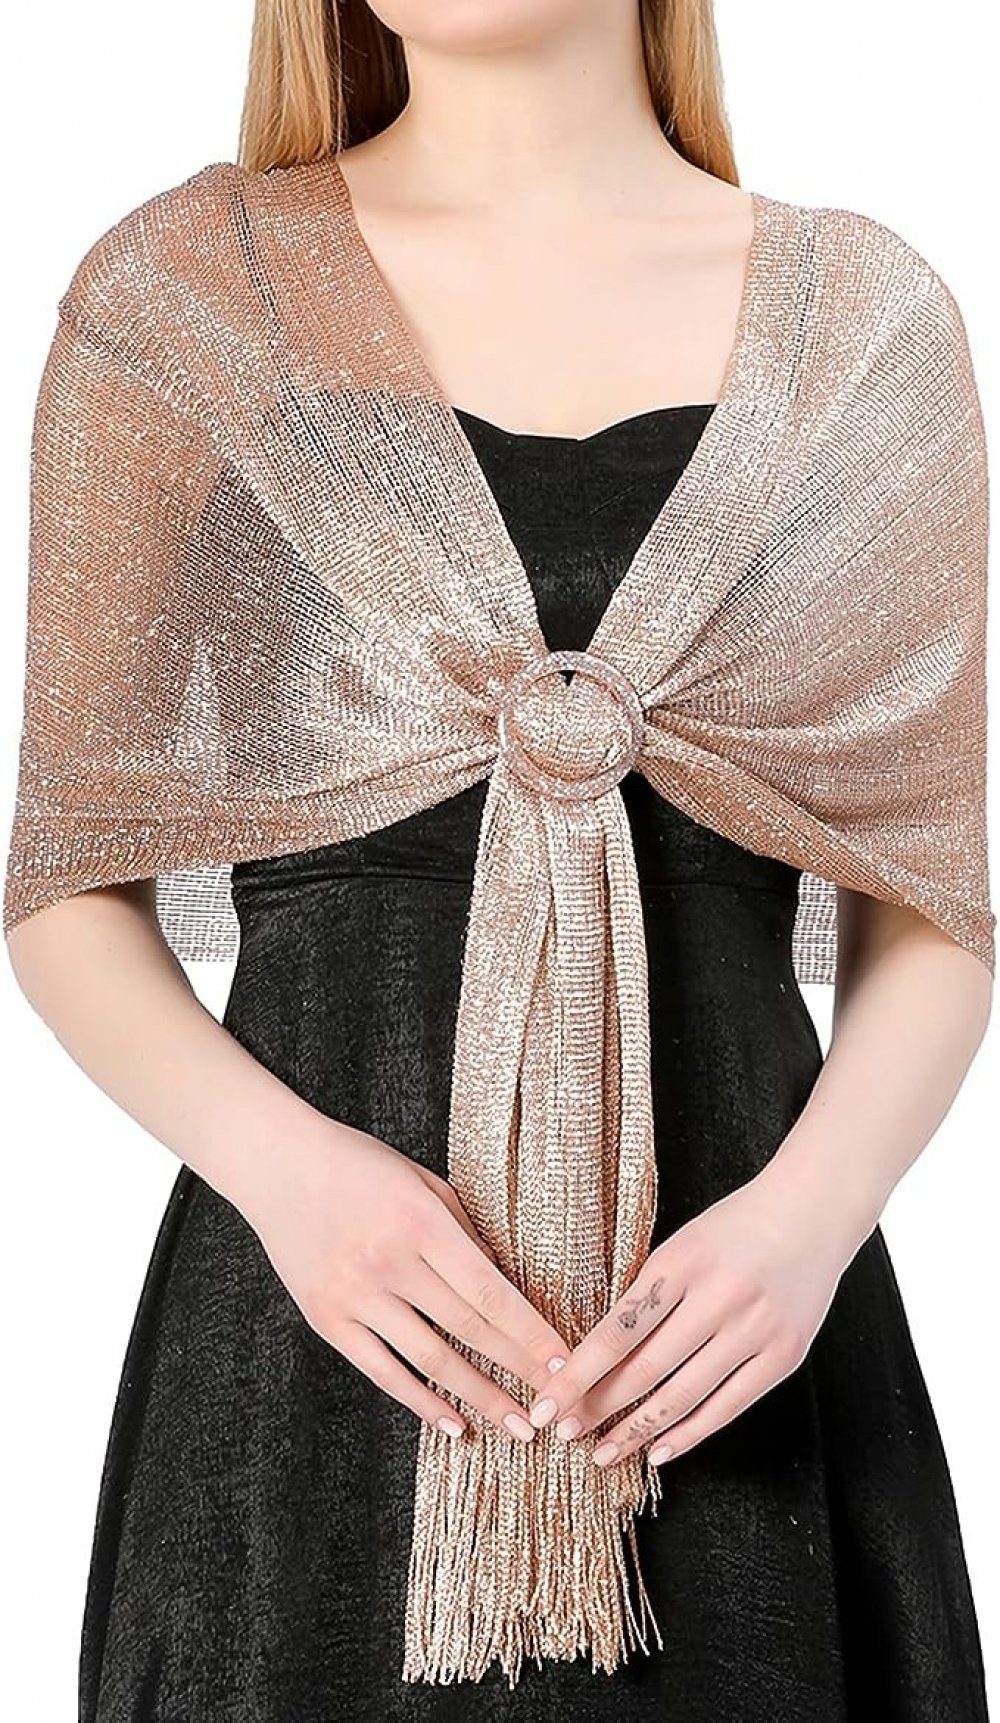 WaKuKa Schal Holiday shawl suitable sparkling metal parties Roségold evening buckle for